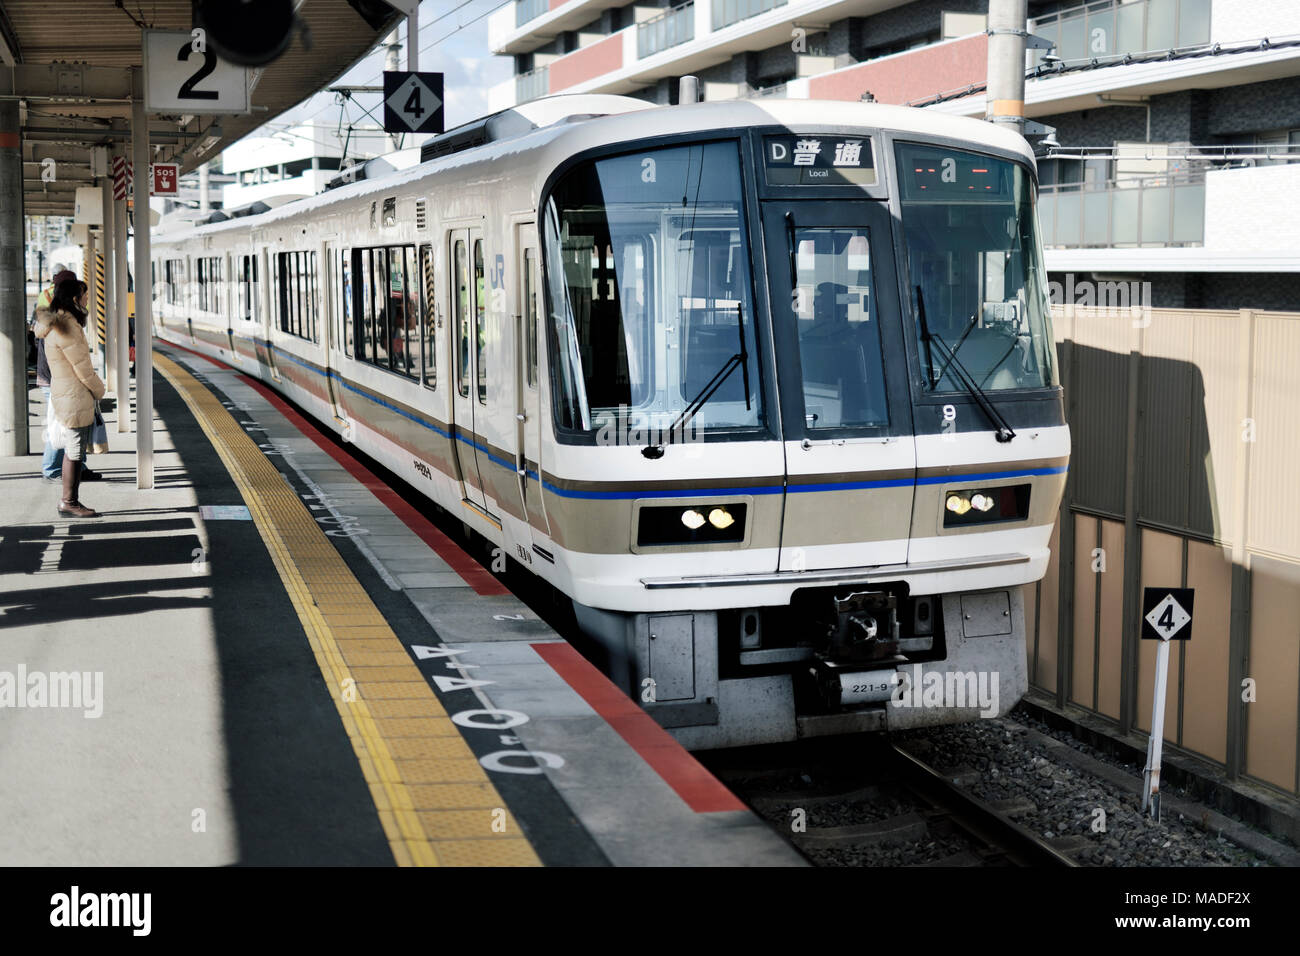 JR train arriving to a train station platform in Kyoto, Japan 2017 Stock Photo